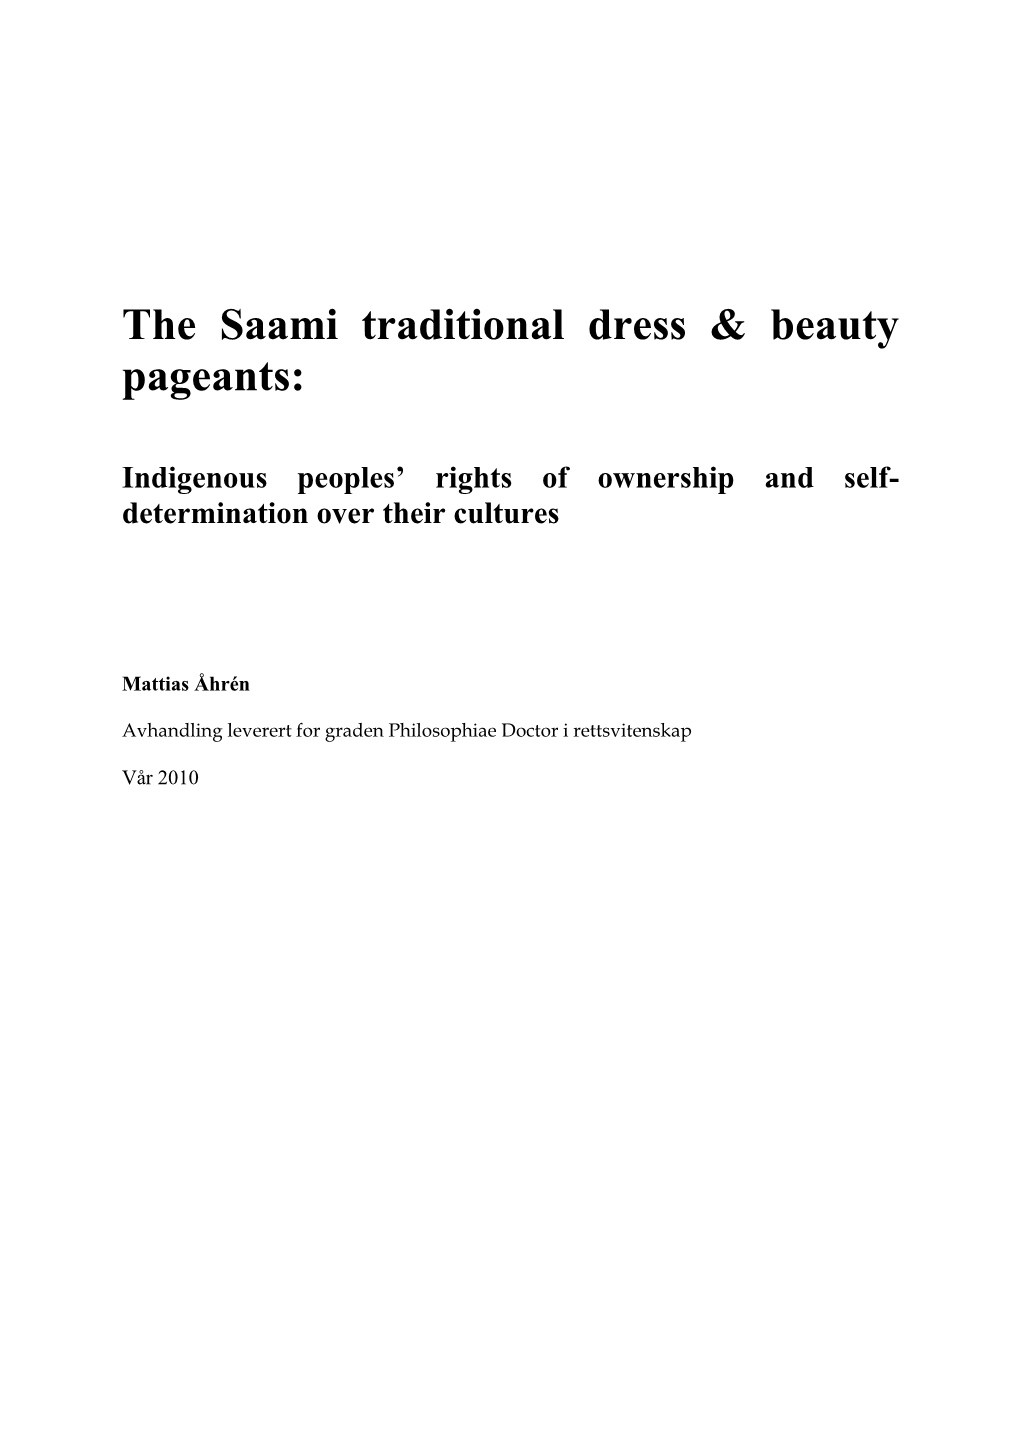 The Saami Traditional Dress & Beauty Pageants